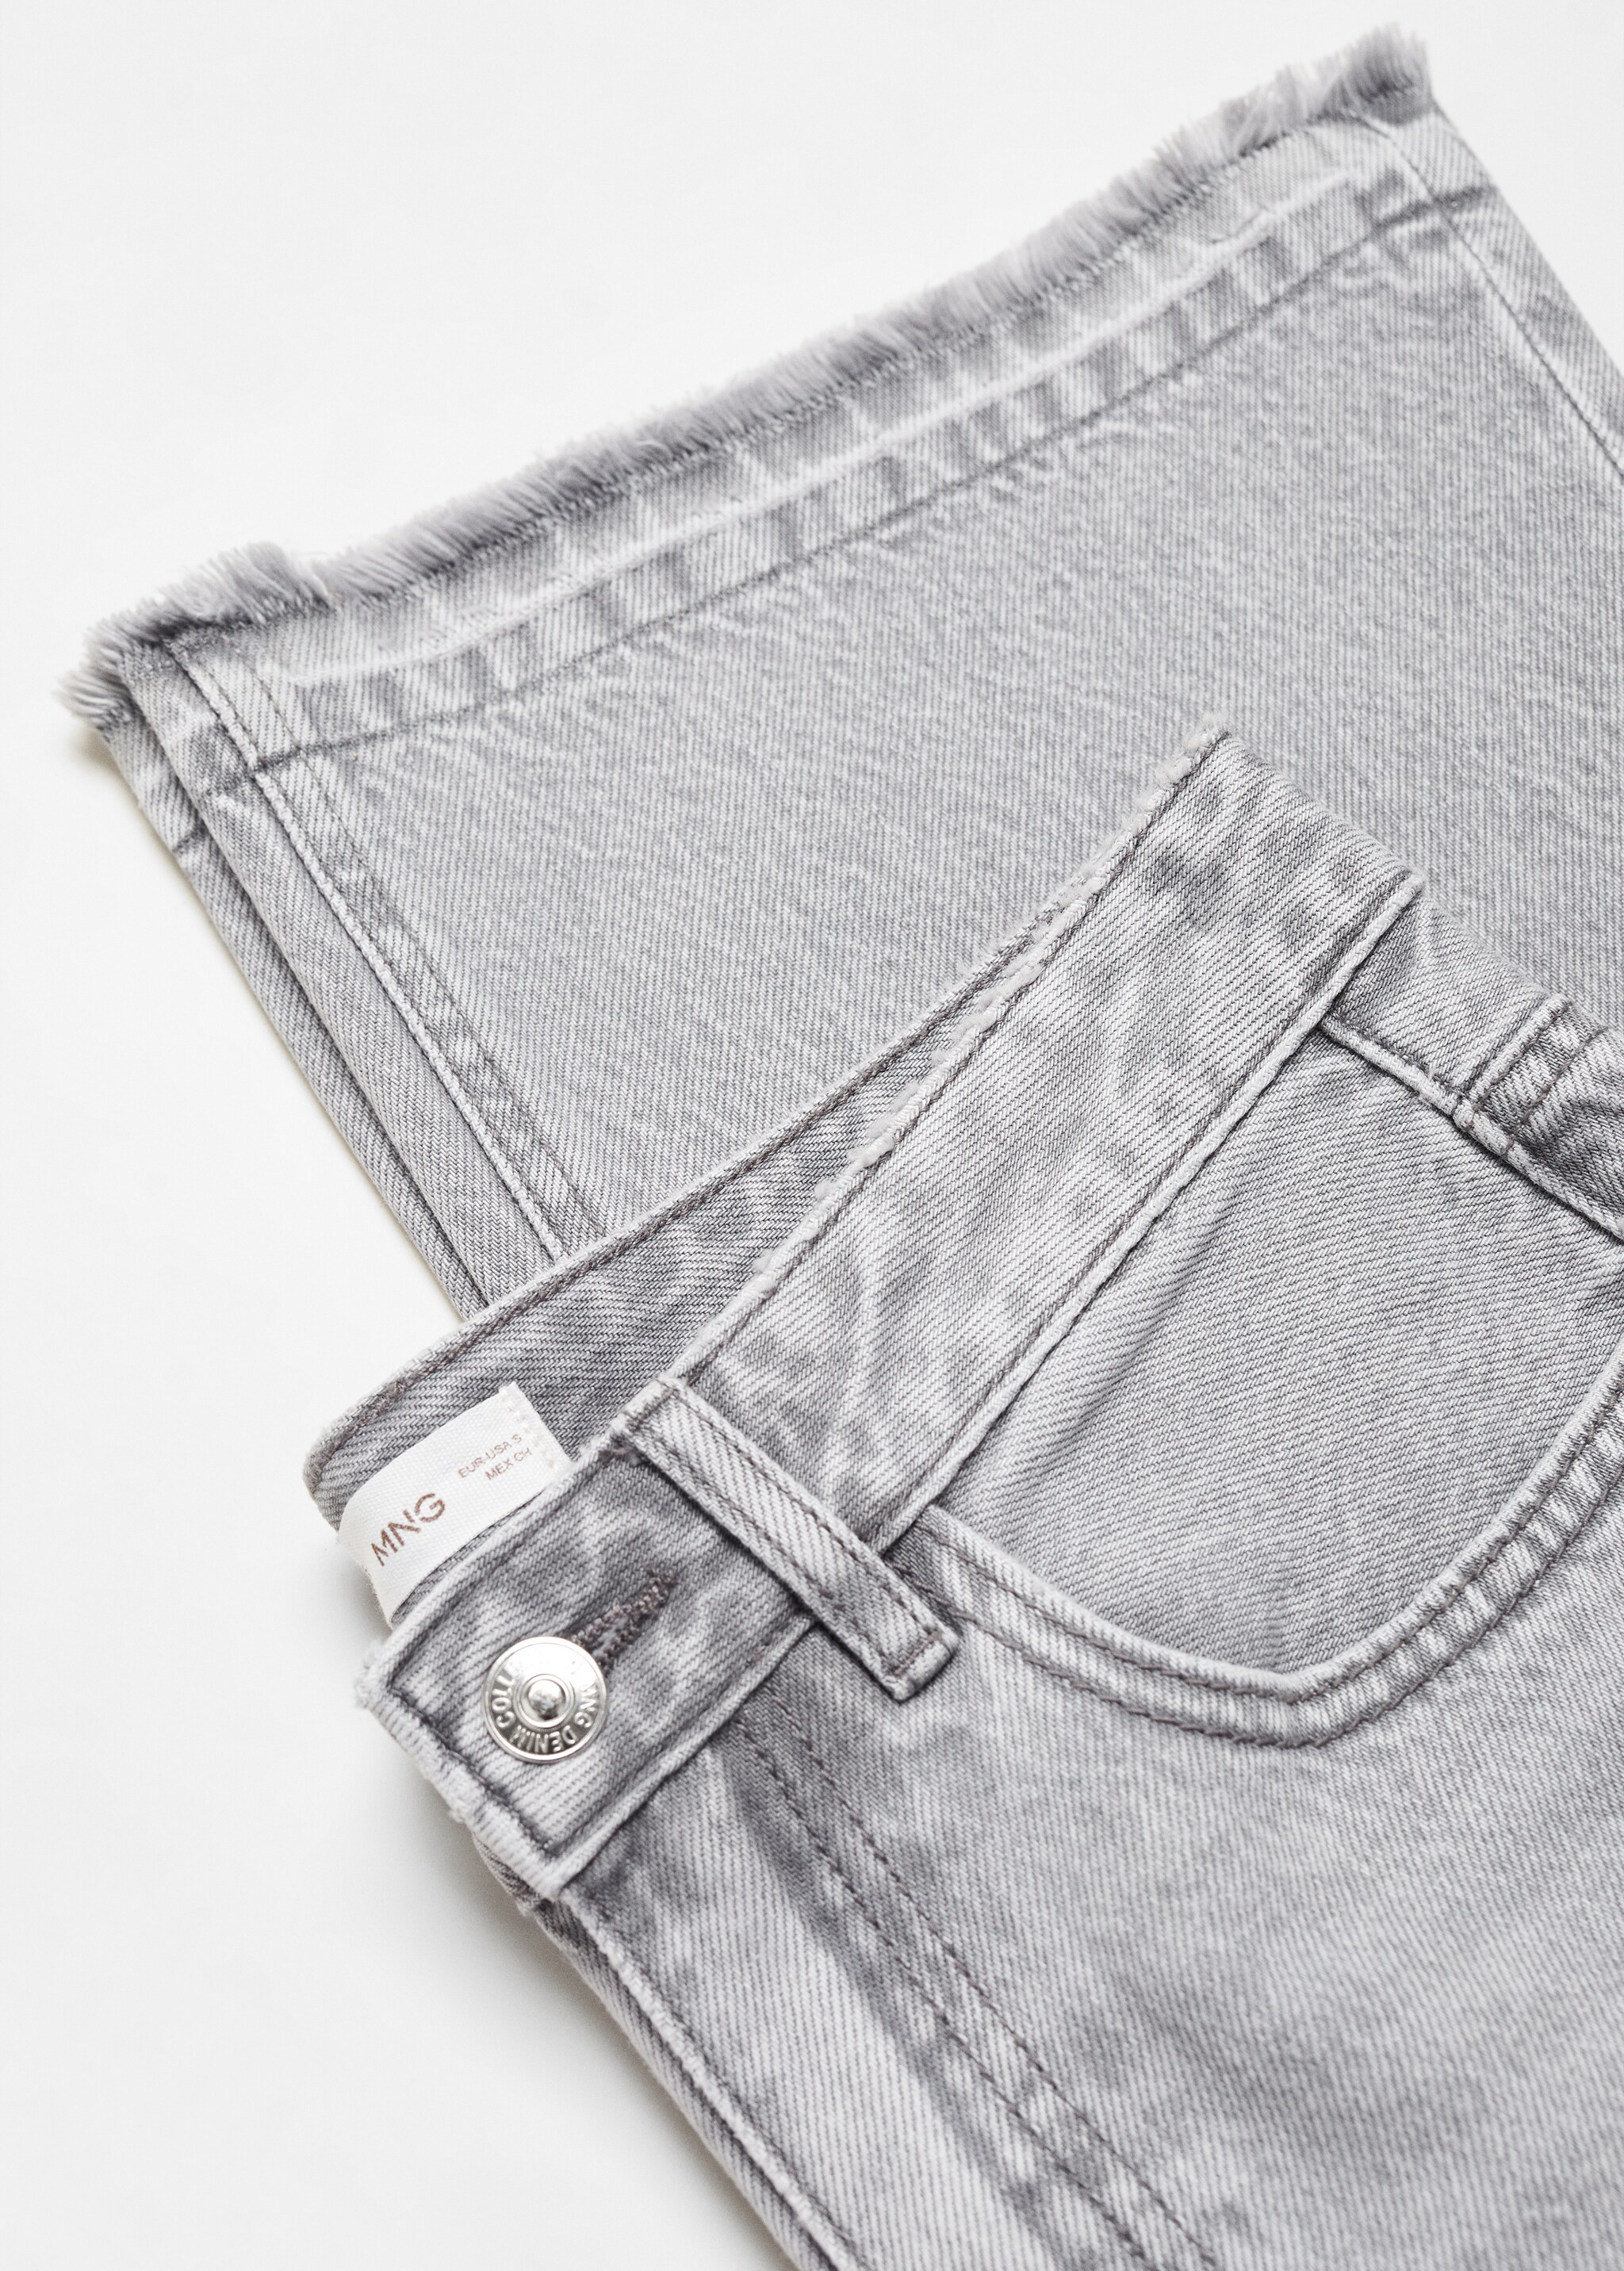 Flared jeans - Details of the article 8